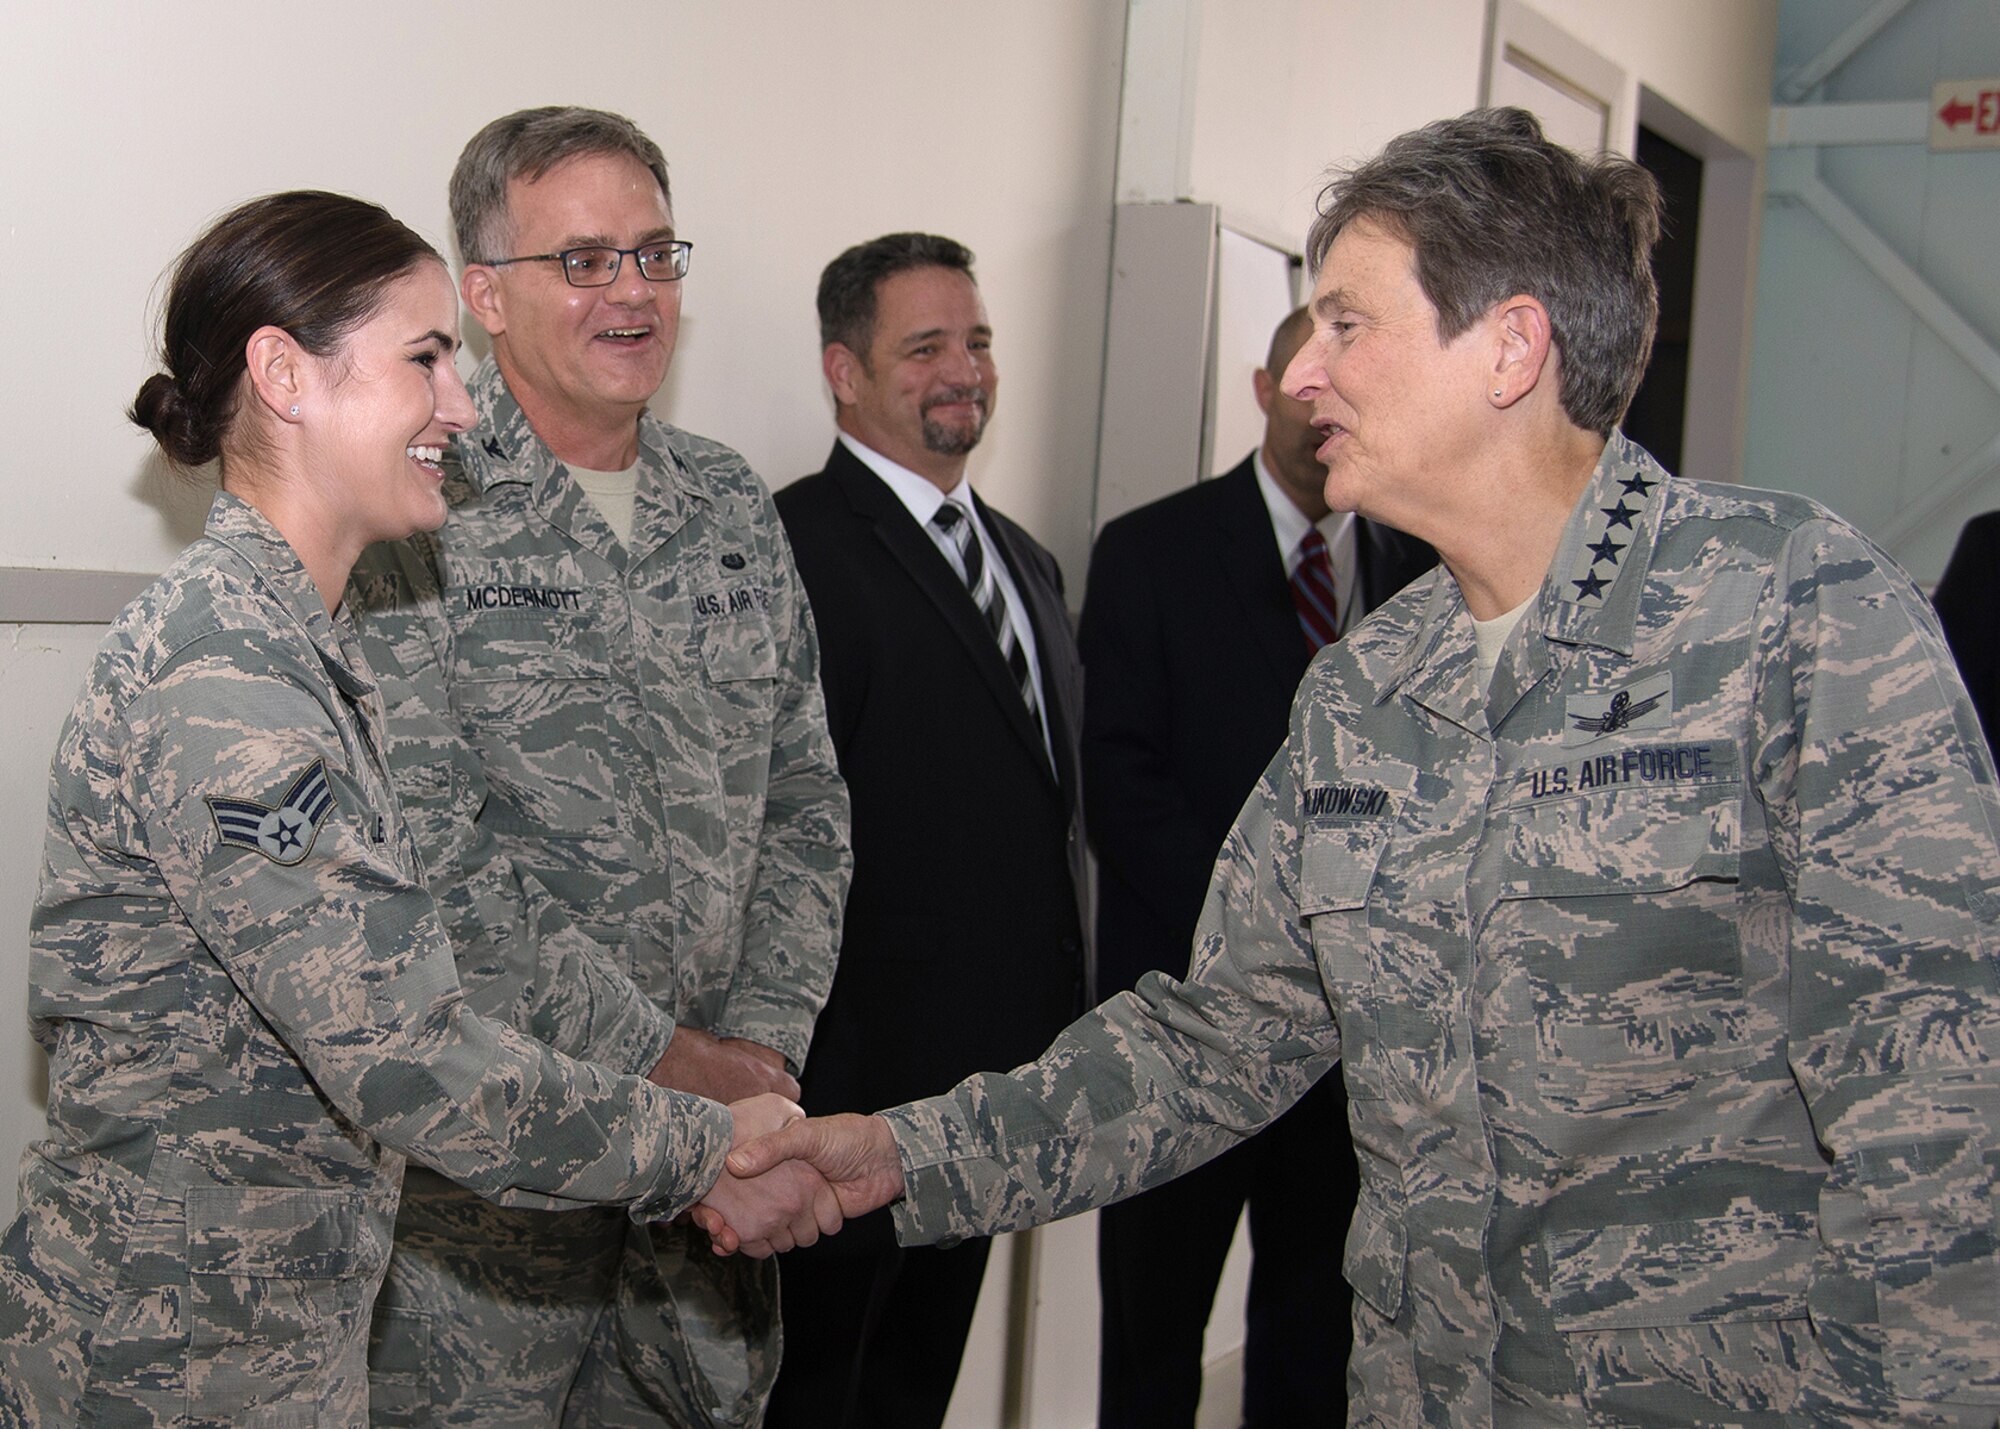 Gen. Ellen M. Pawlikowski, commander of Air Force Materiel Command, presents a coin to Senior Airman Kelly Pletz, a paralegal with the 66th Air Base Group, during a visit to Hanscom Air Force Base, Mass., Oct. 21, as Col. Richard J. McDermott, 66th Air Base Group staff judge advocate, and others look on. While at Hanscom, Pawlikowski met with Hanscom program executive officers, participated in a Revolutionary Acquisition Techniques Procedures and Collaboration, or RATPAC, panel discussion and toured the installation. (U.S. Air Force photo by Mark Herlihy)